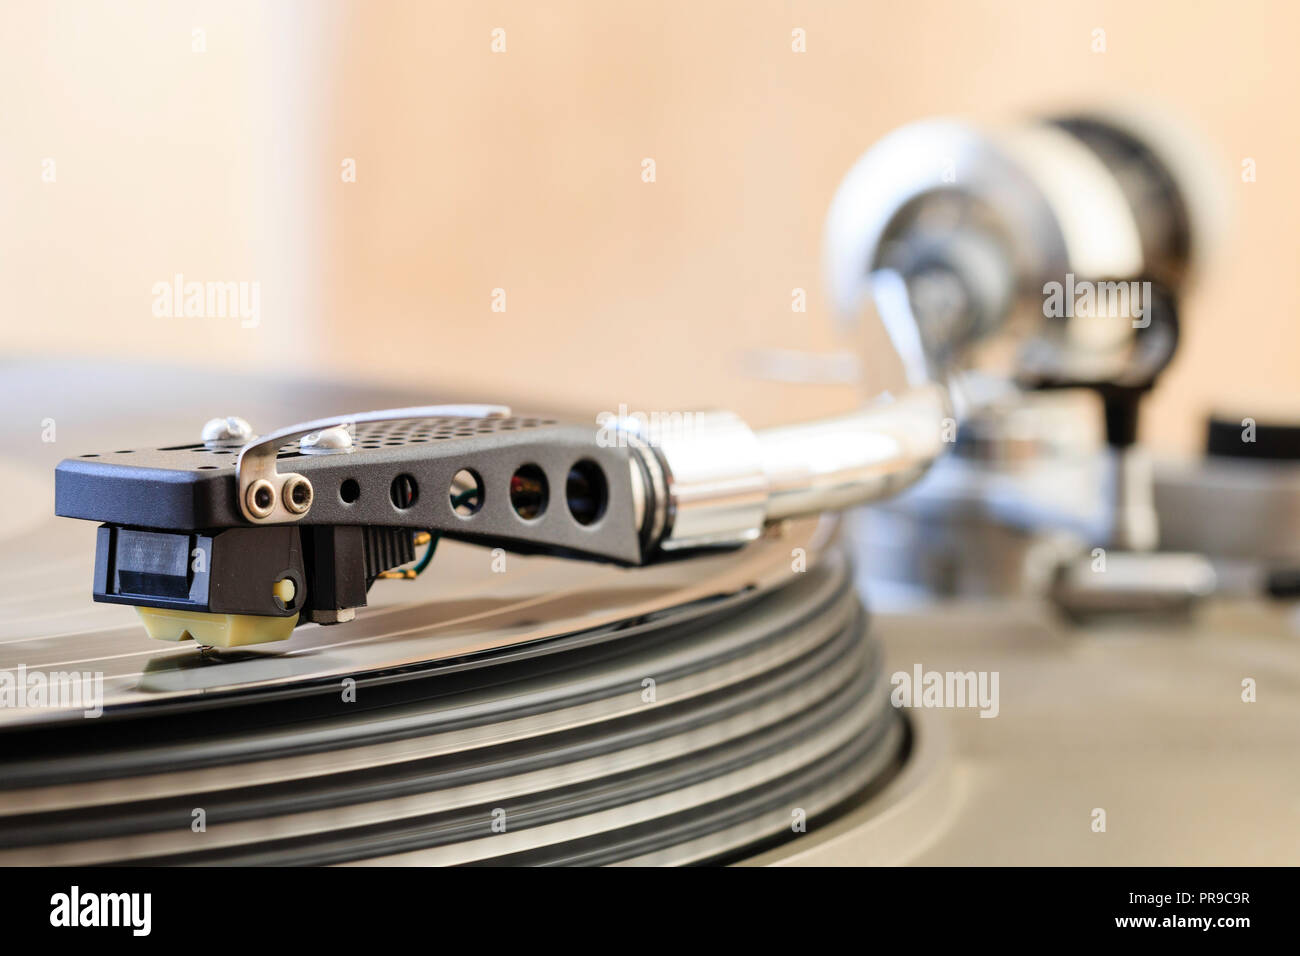 Record player, deck. 'S' shape tone arm playing long player record, LP, vinyl, also known as long playing record. Stock Photo